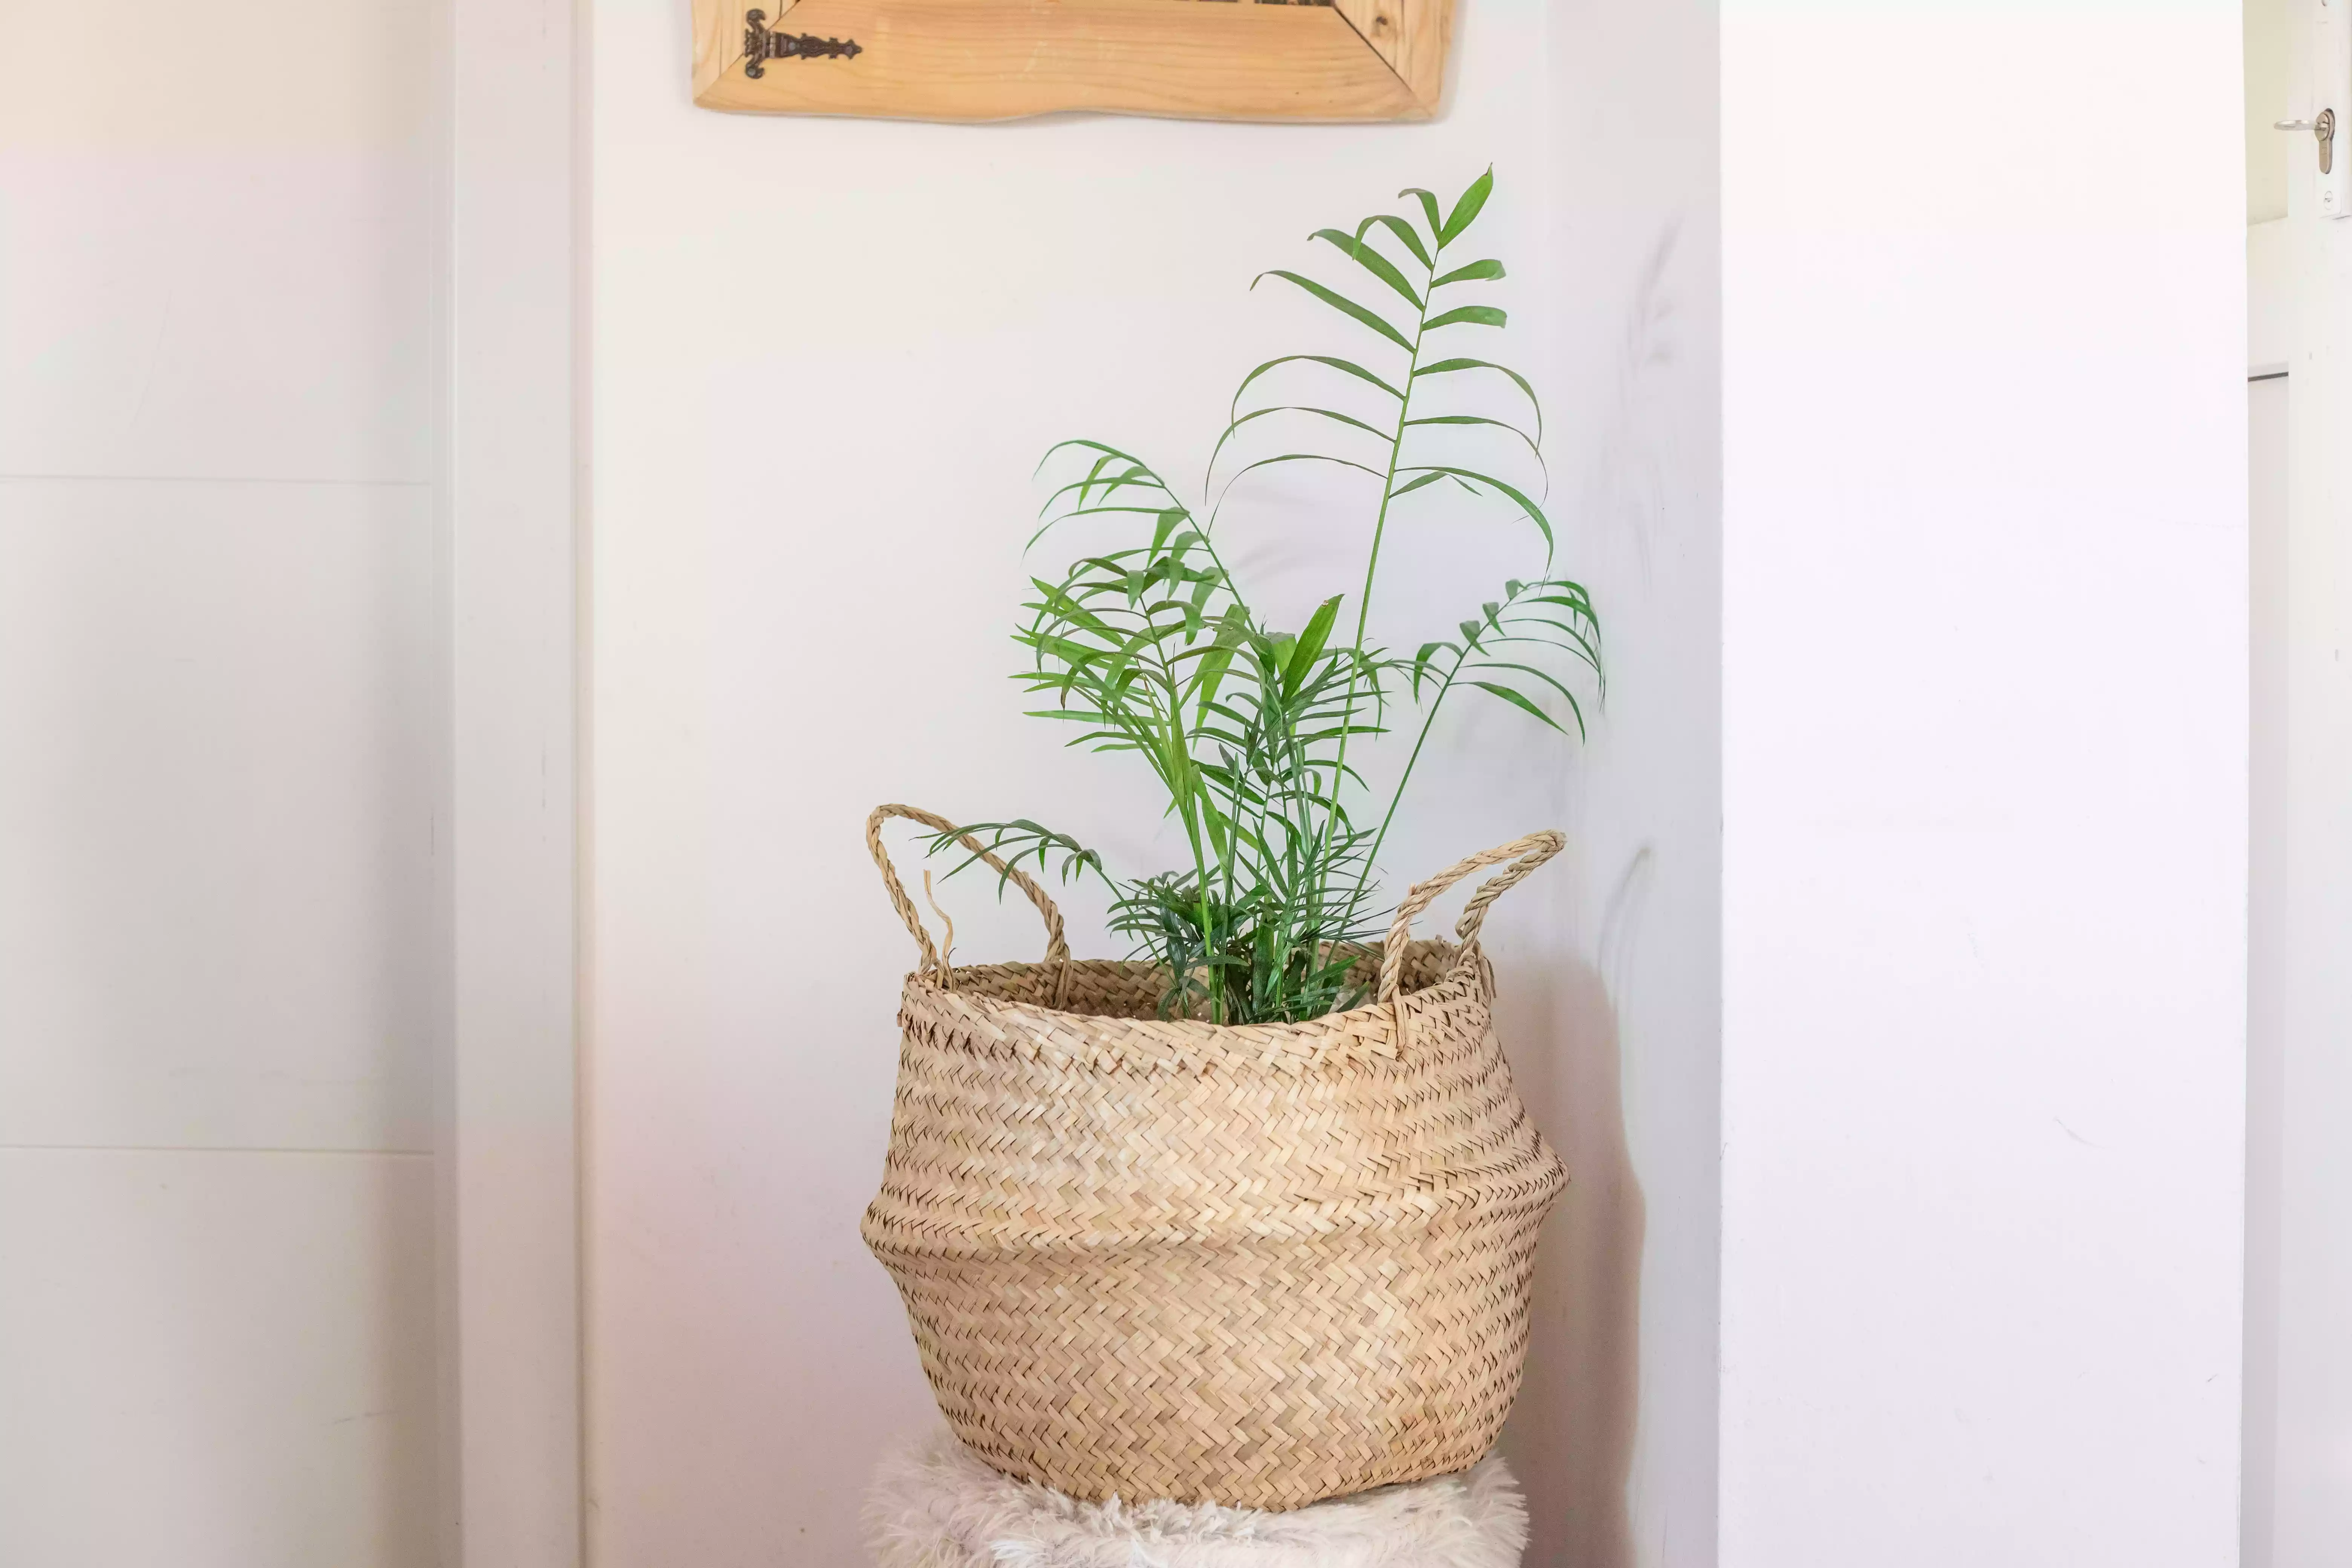 Parlor palm plant in woven basket pot on stool in white house